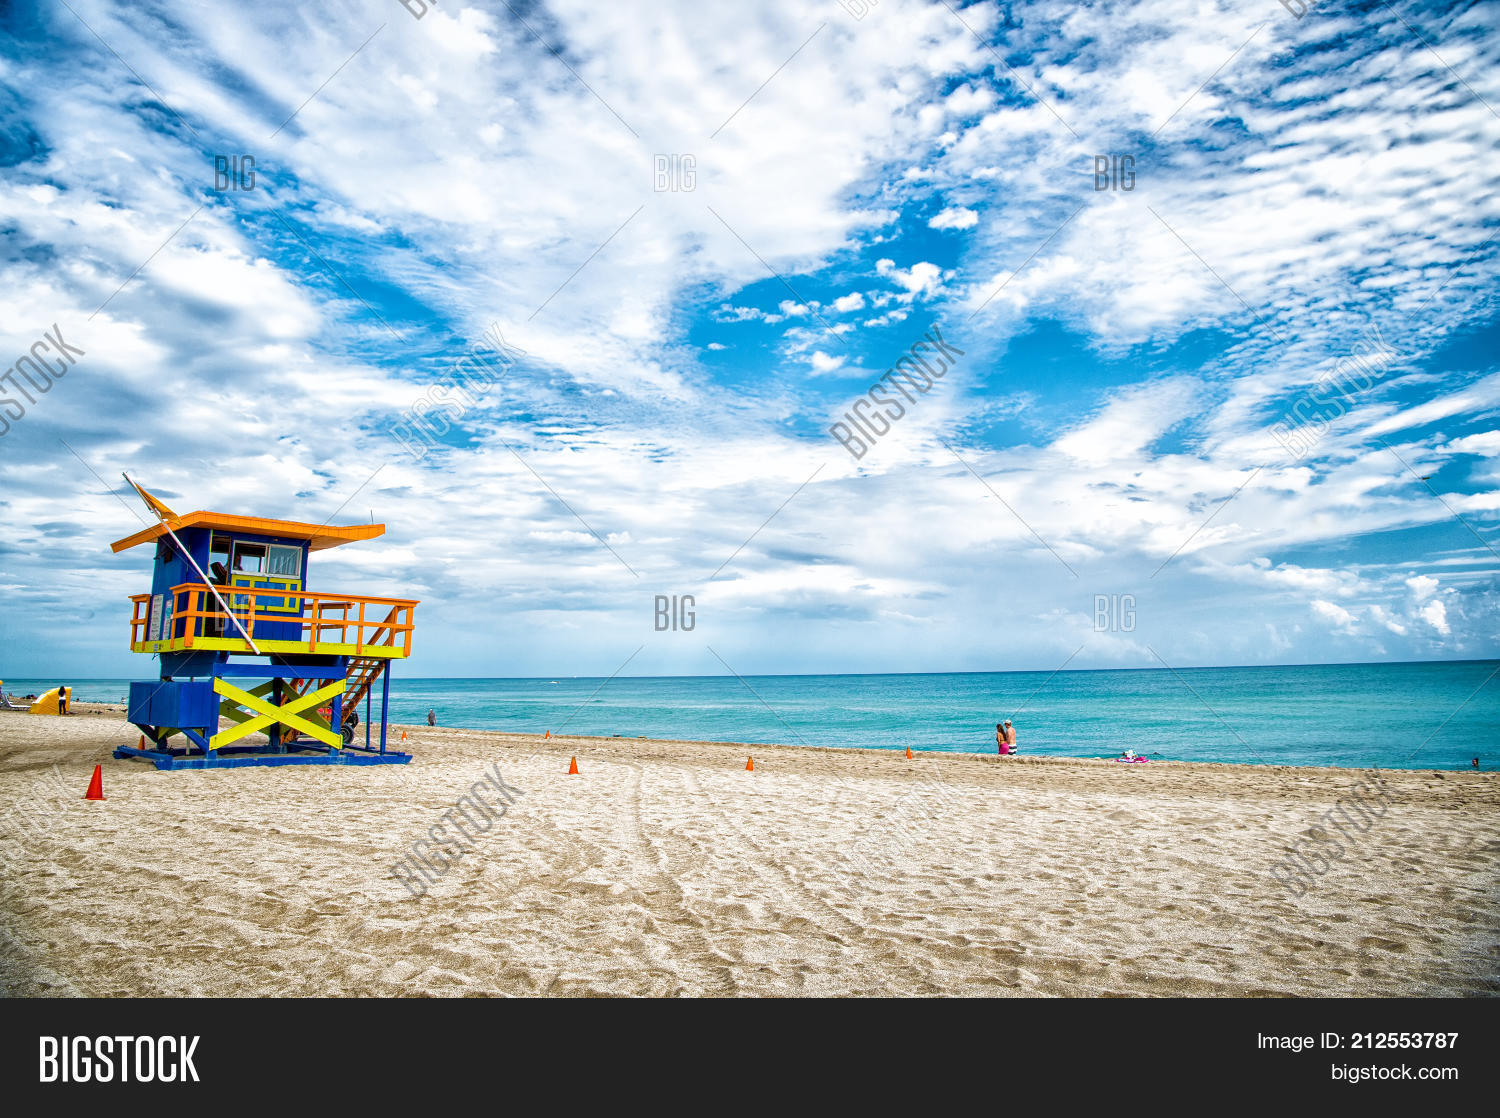 Lifeguard Tower Rescue Image Photo Trial Bigstock